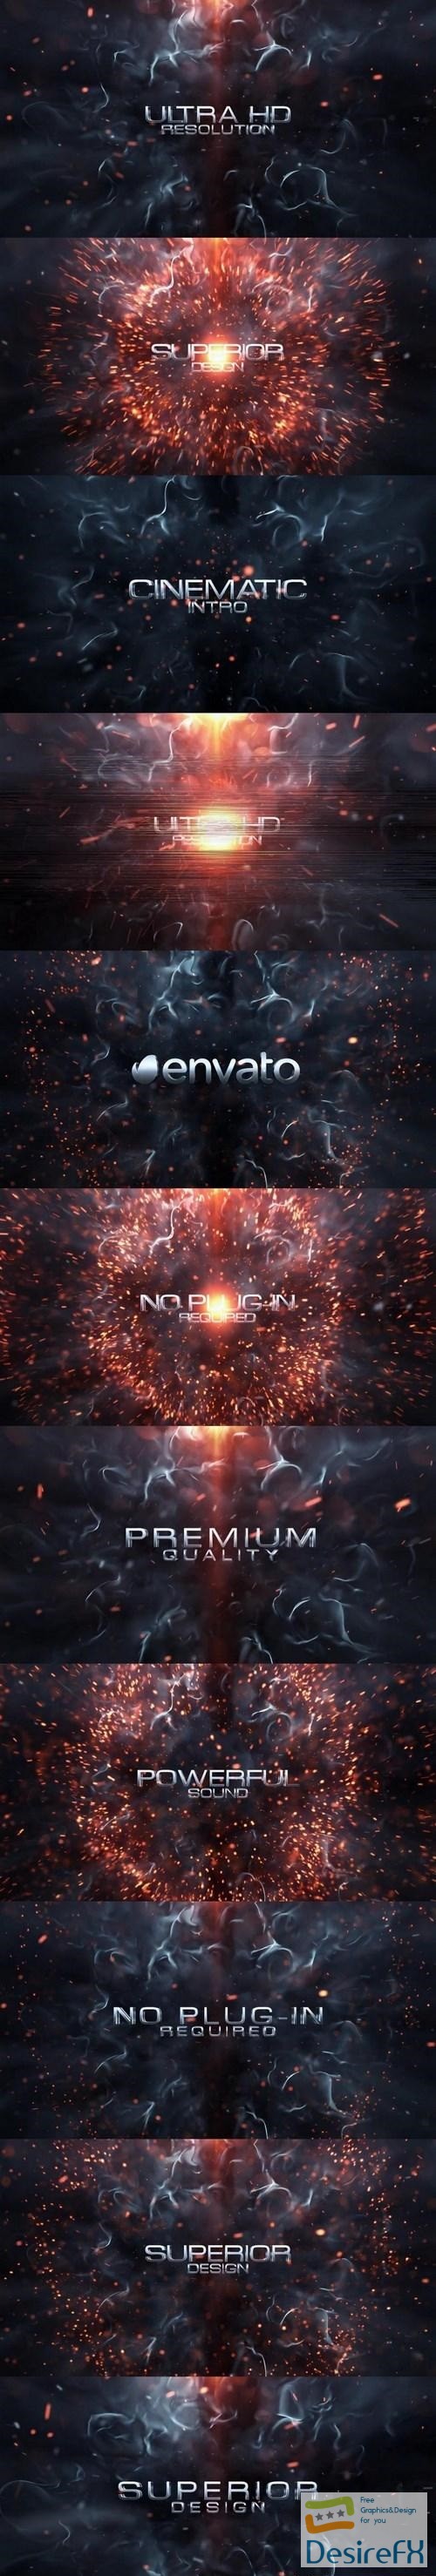 Videohive 19634339 Cinematic Titles